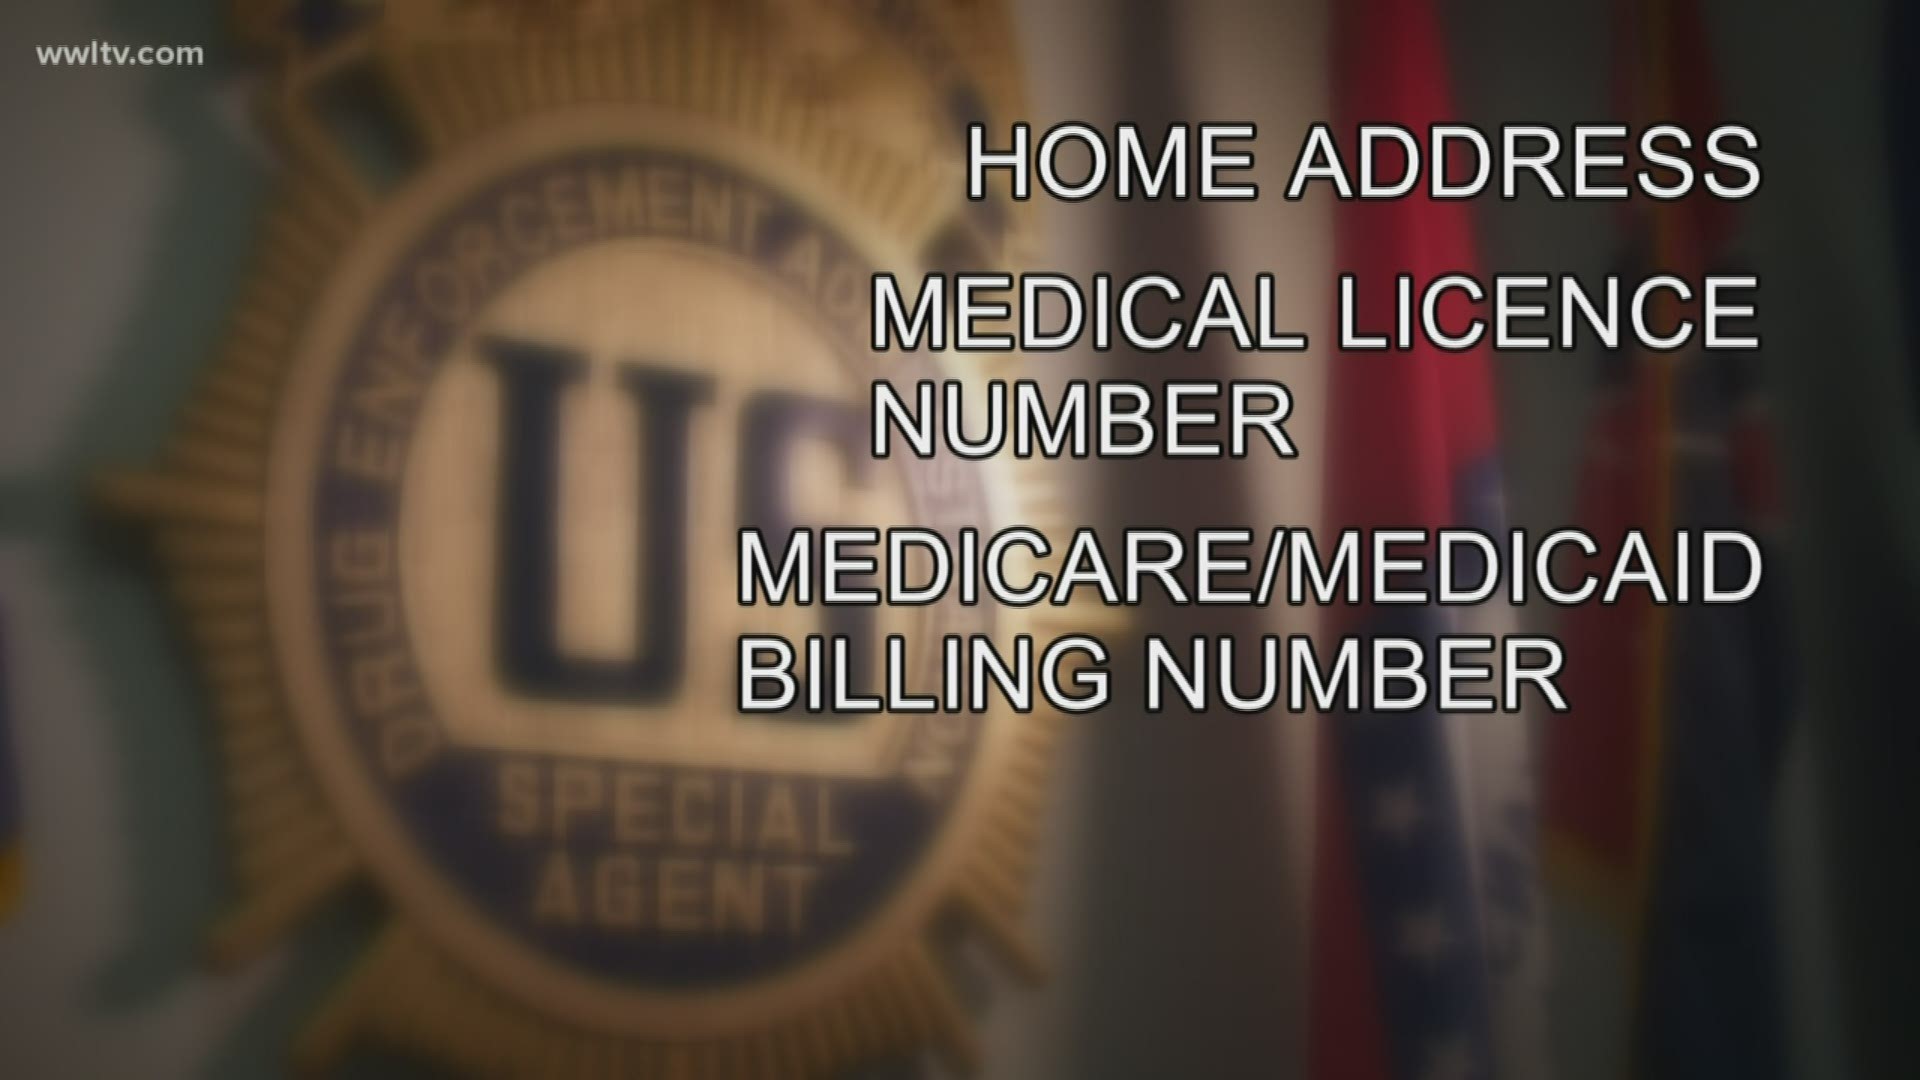 The "agent" had his home address, his medical license number and Medicare/Medicaid billing number